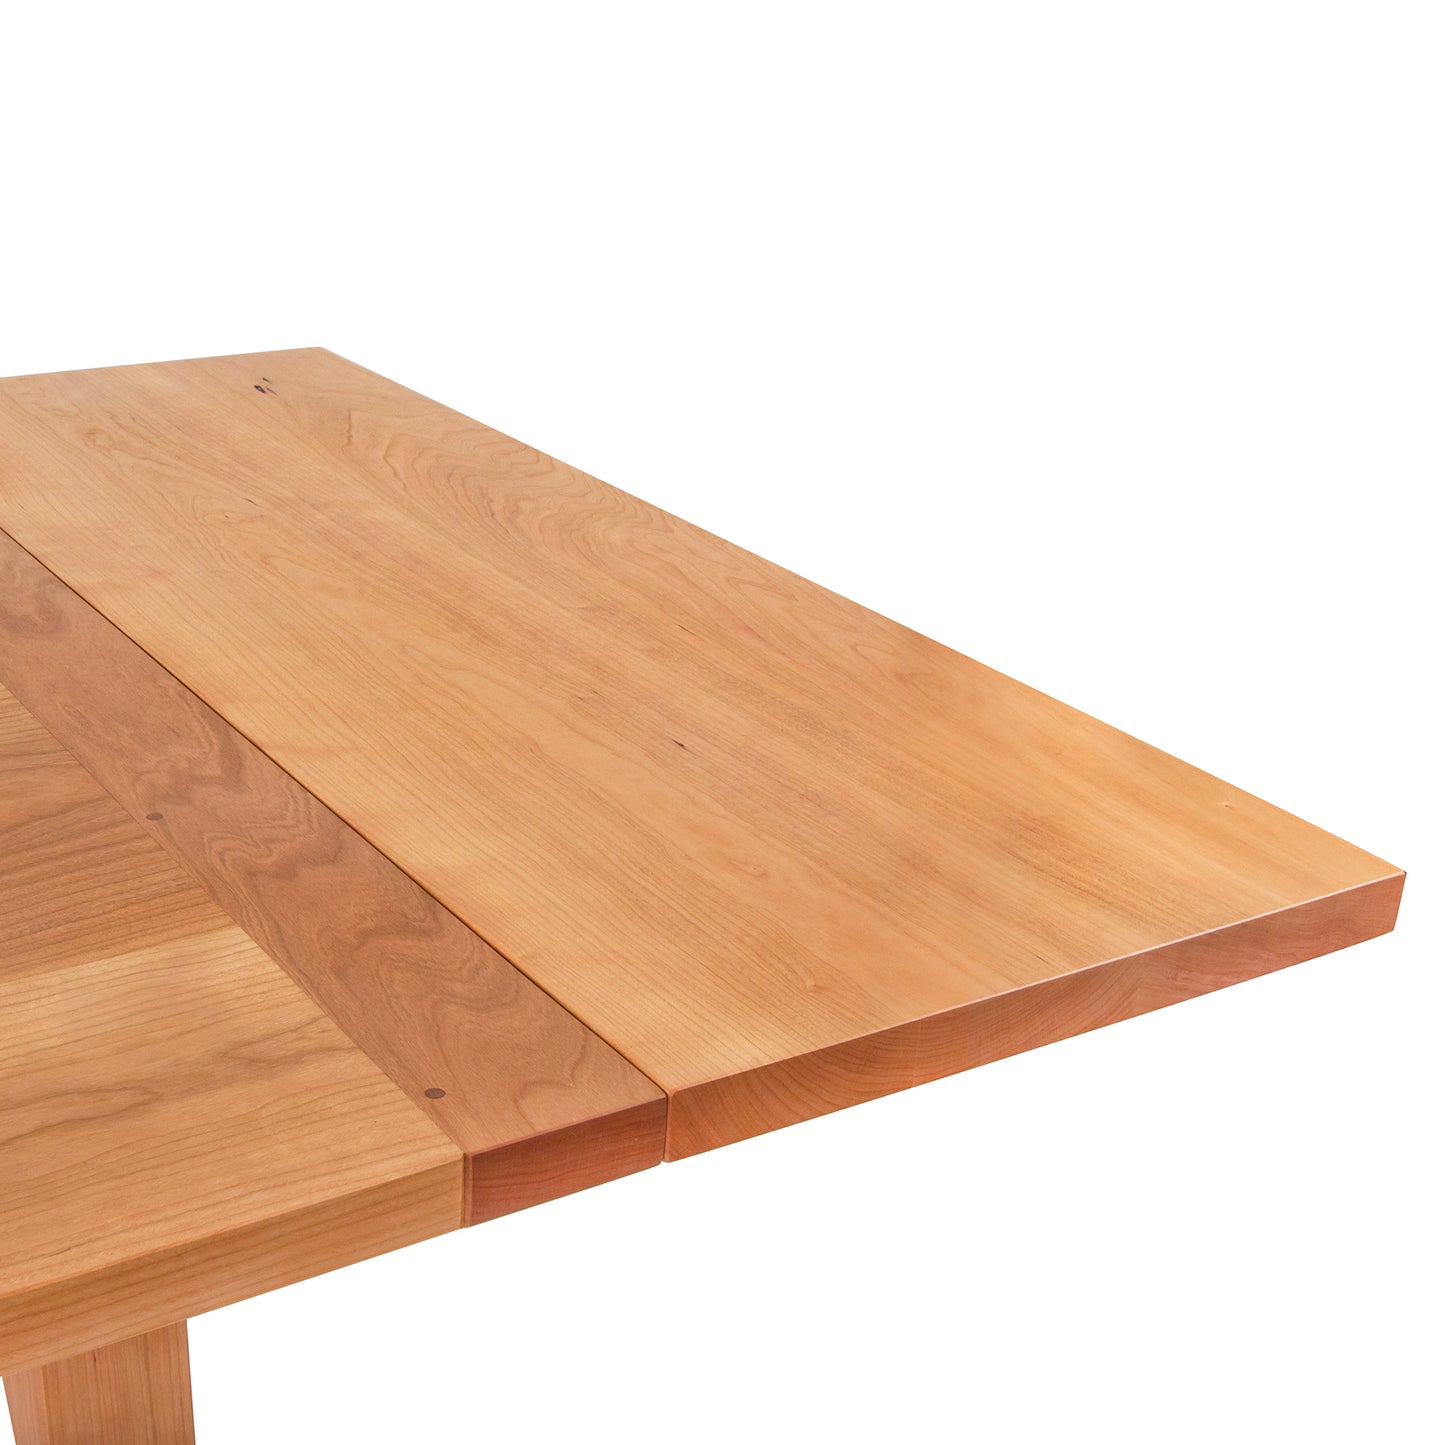 A customizable Maple Corner Woodworks Vermont Shaker Harvest Extension Dining Table with a smooth finish, made from sustainably harvested woods, isolated on a white background.